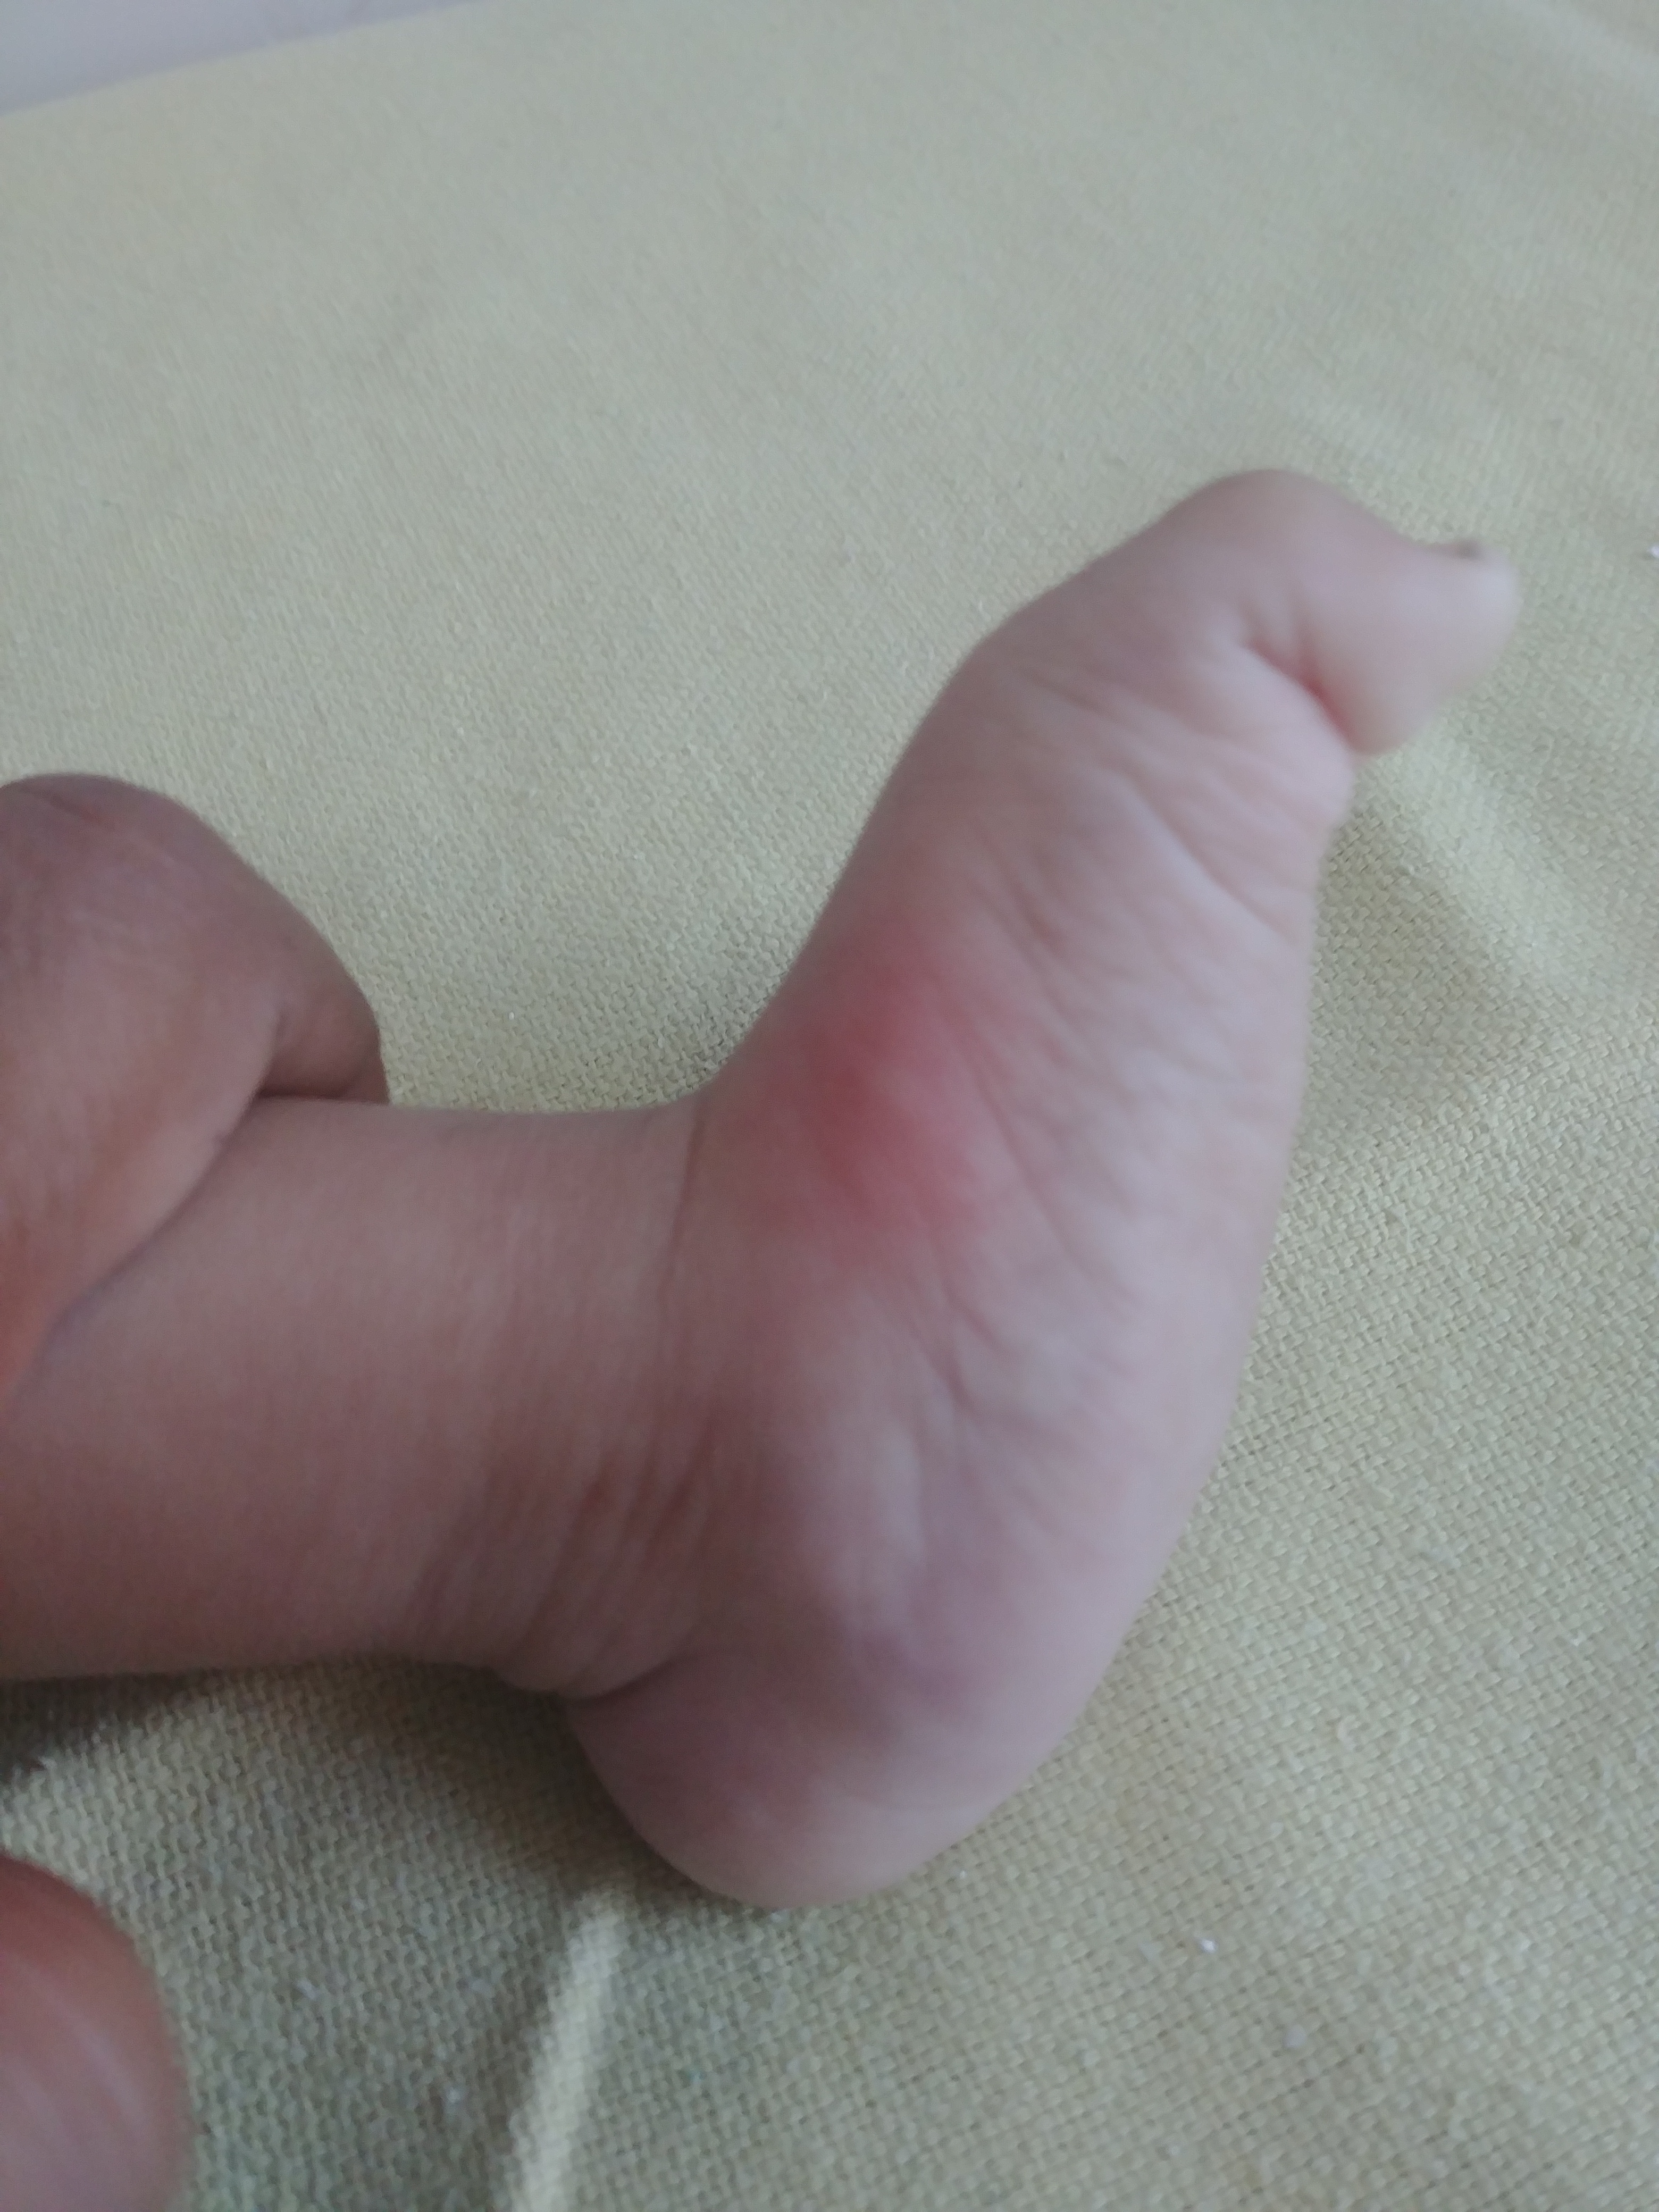 This clinical picture showing the rocket bottom appearance in a case of congenital vertical talus